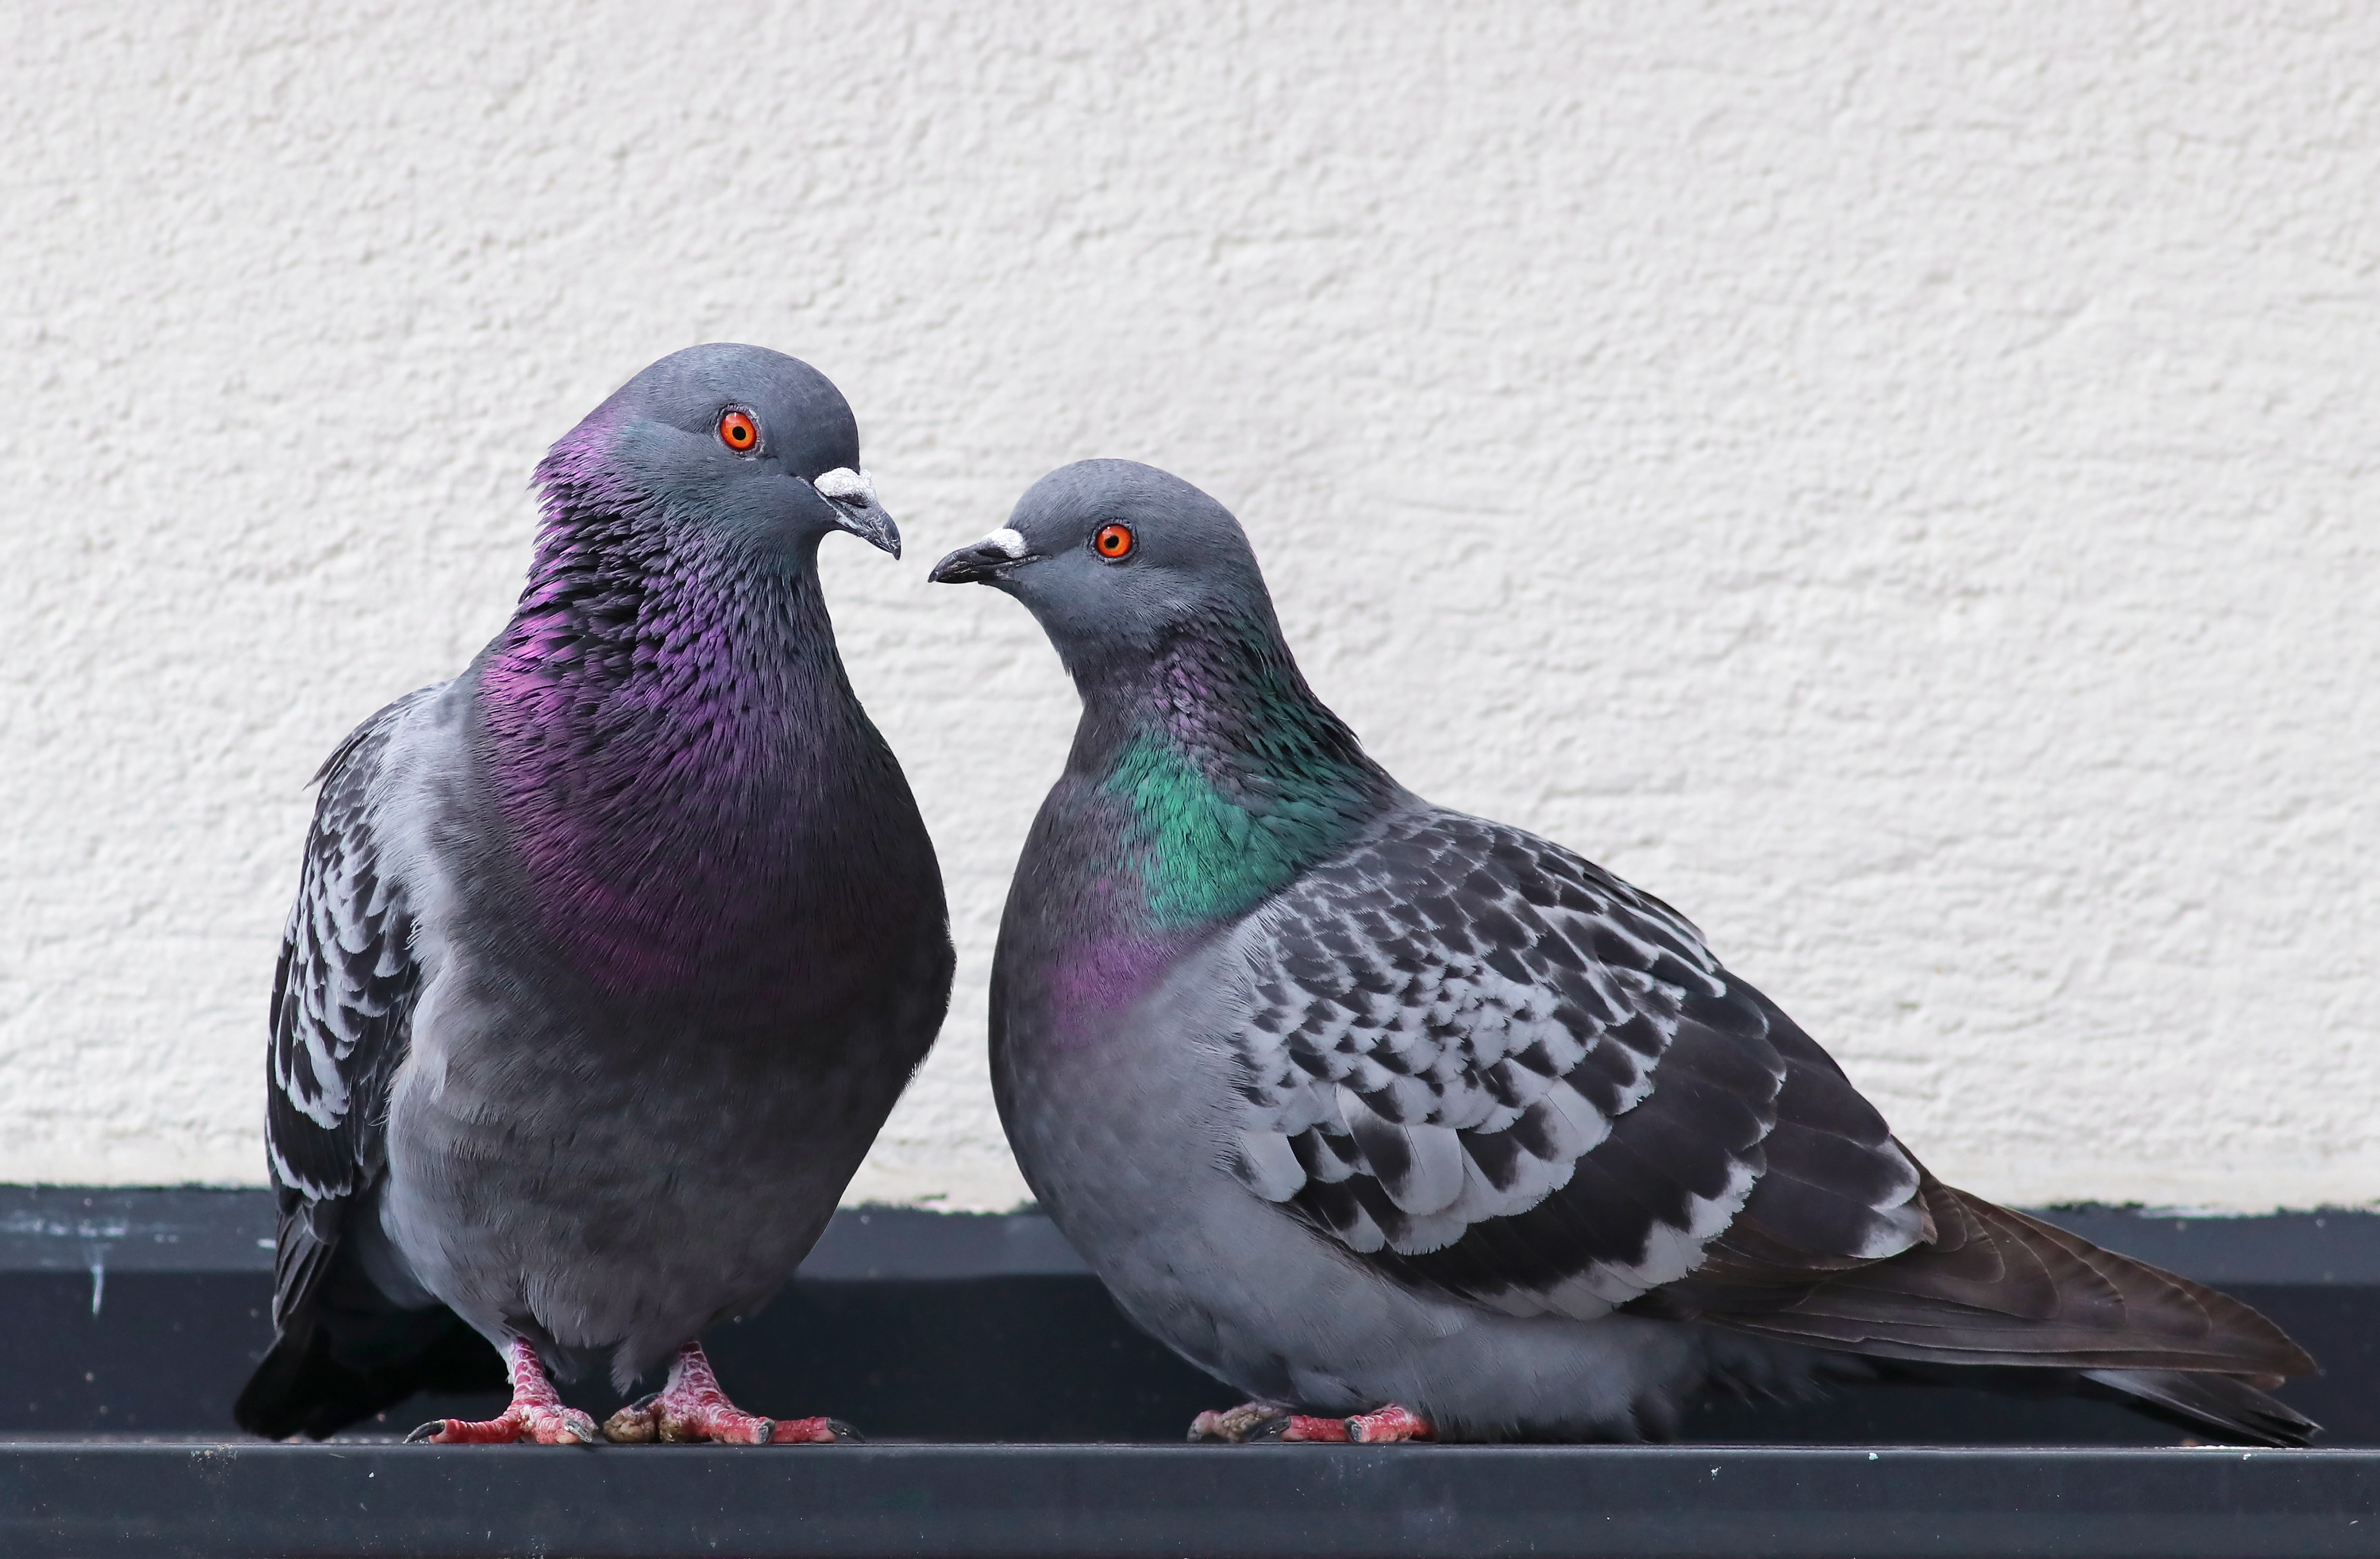 The pigeon is the latest of several detained by Indian authorities on suspicion of espionage. Photo: Shutterstock